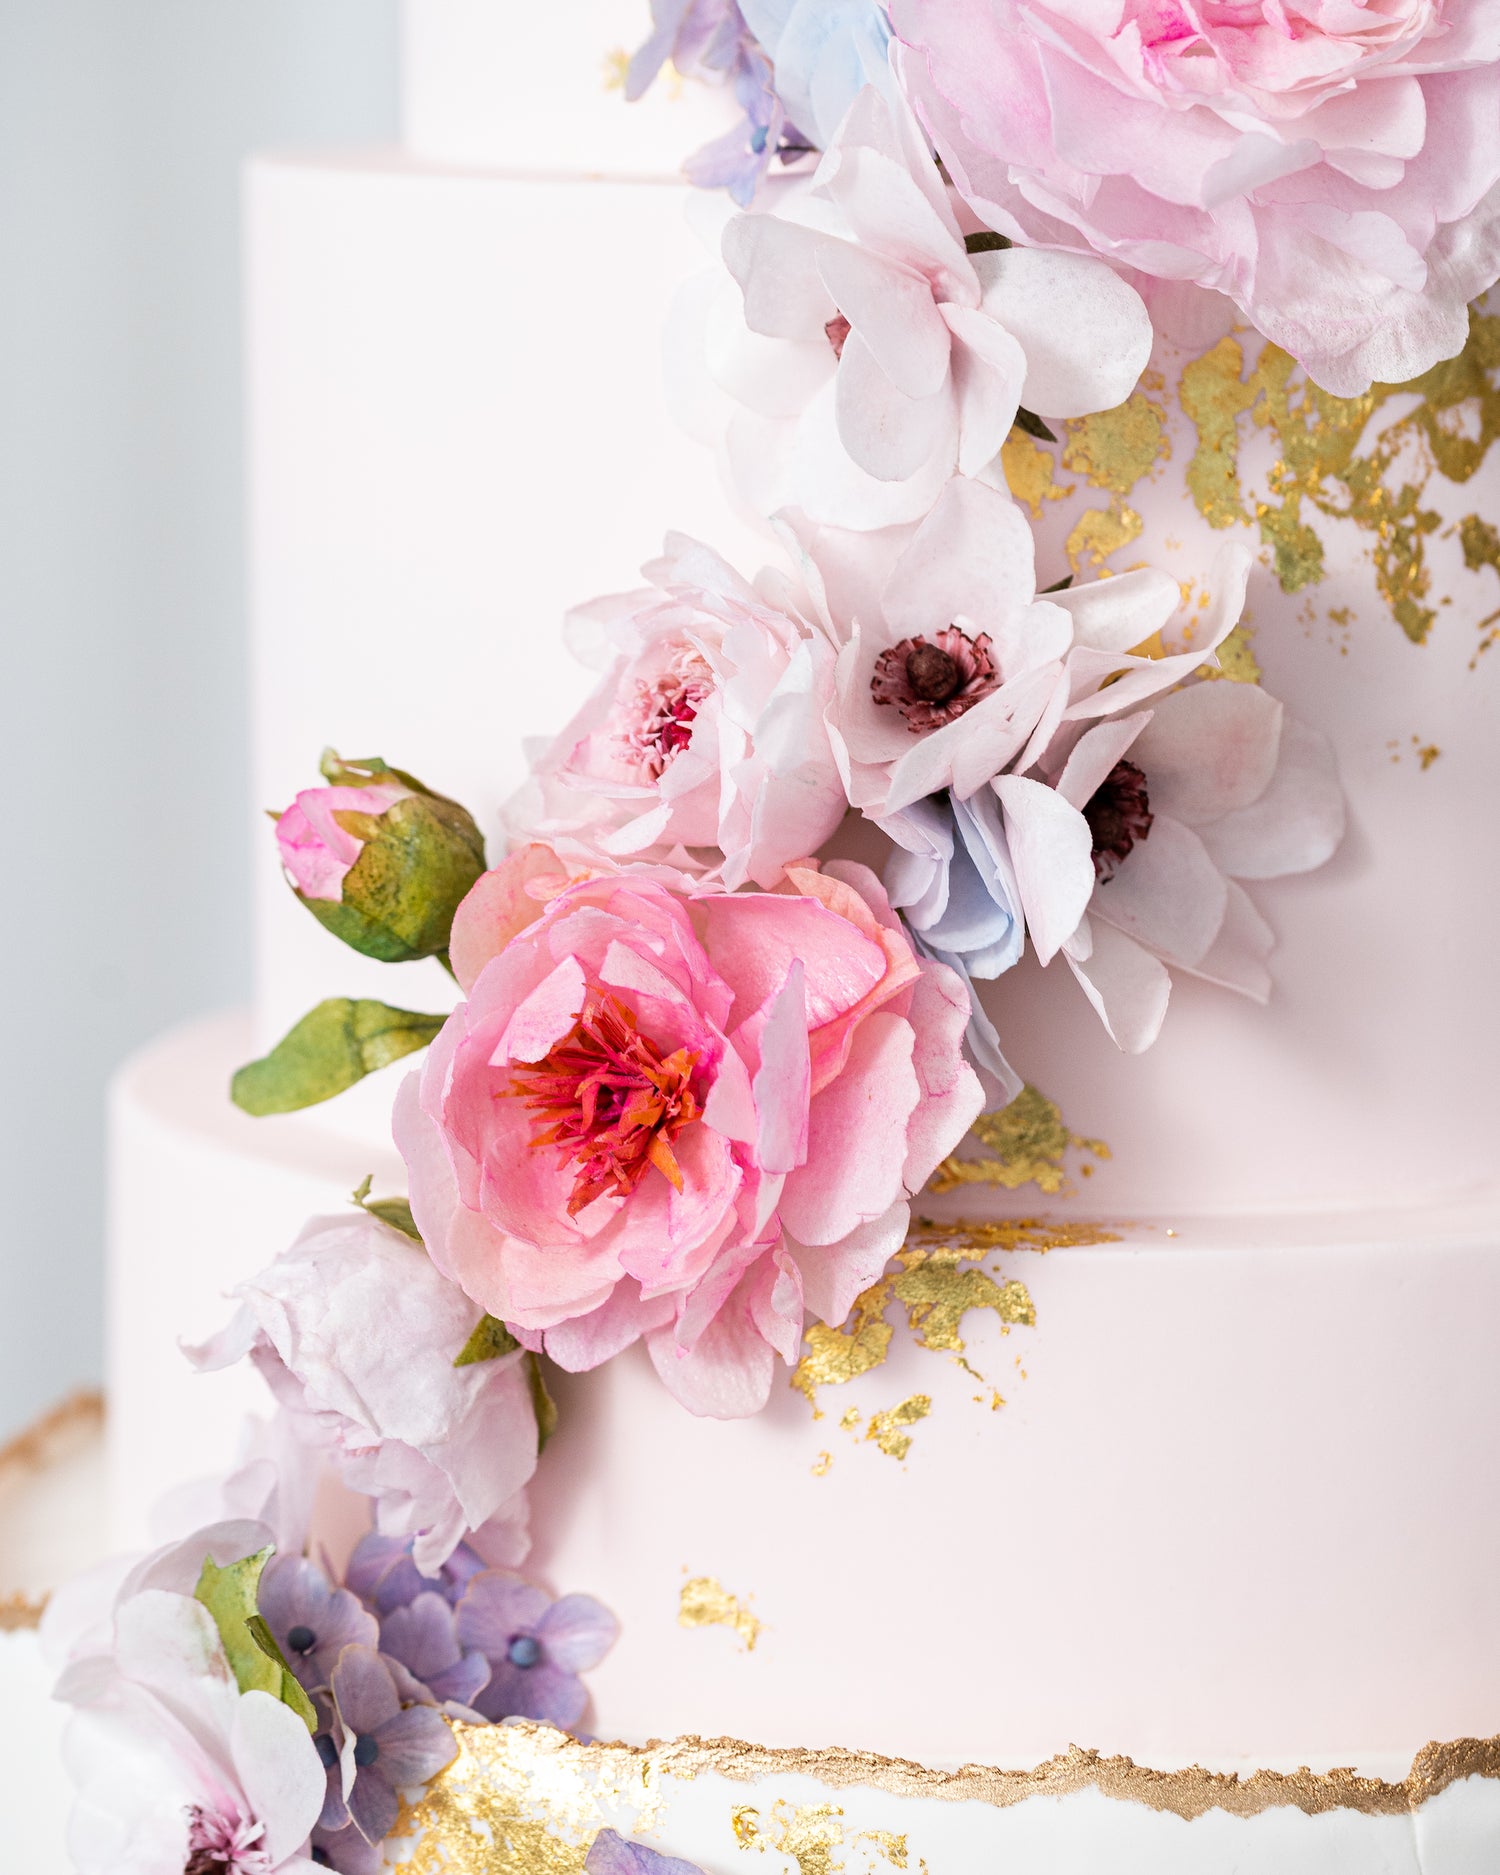 Complete Guide To Edible Wafer Paper Flowers for Cakes